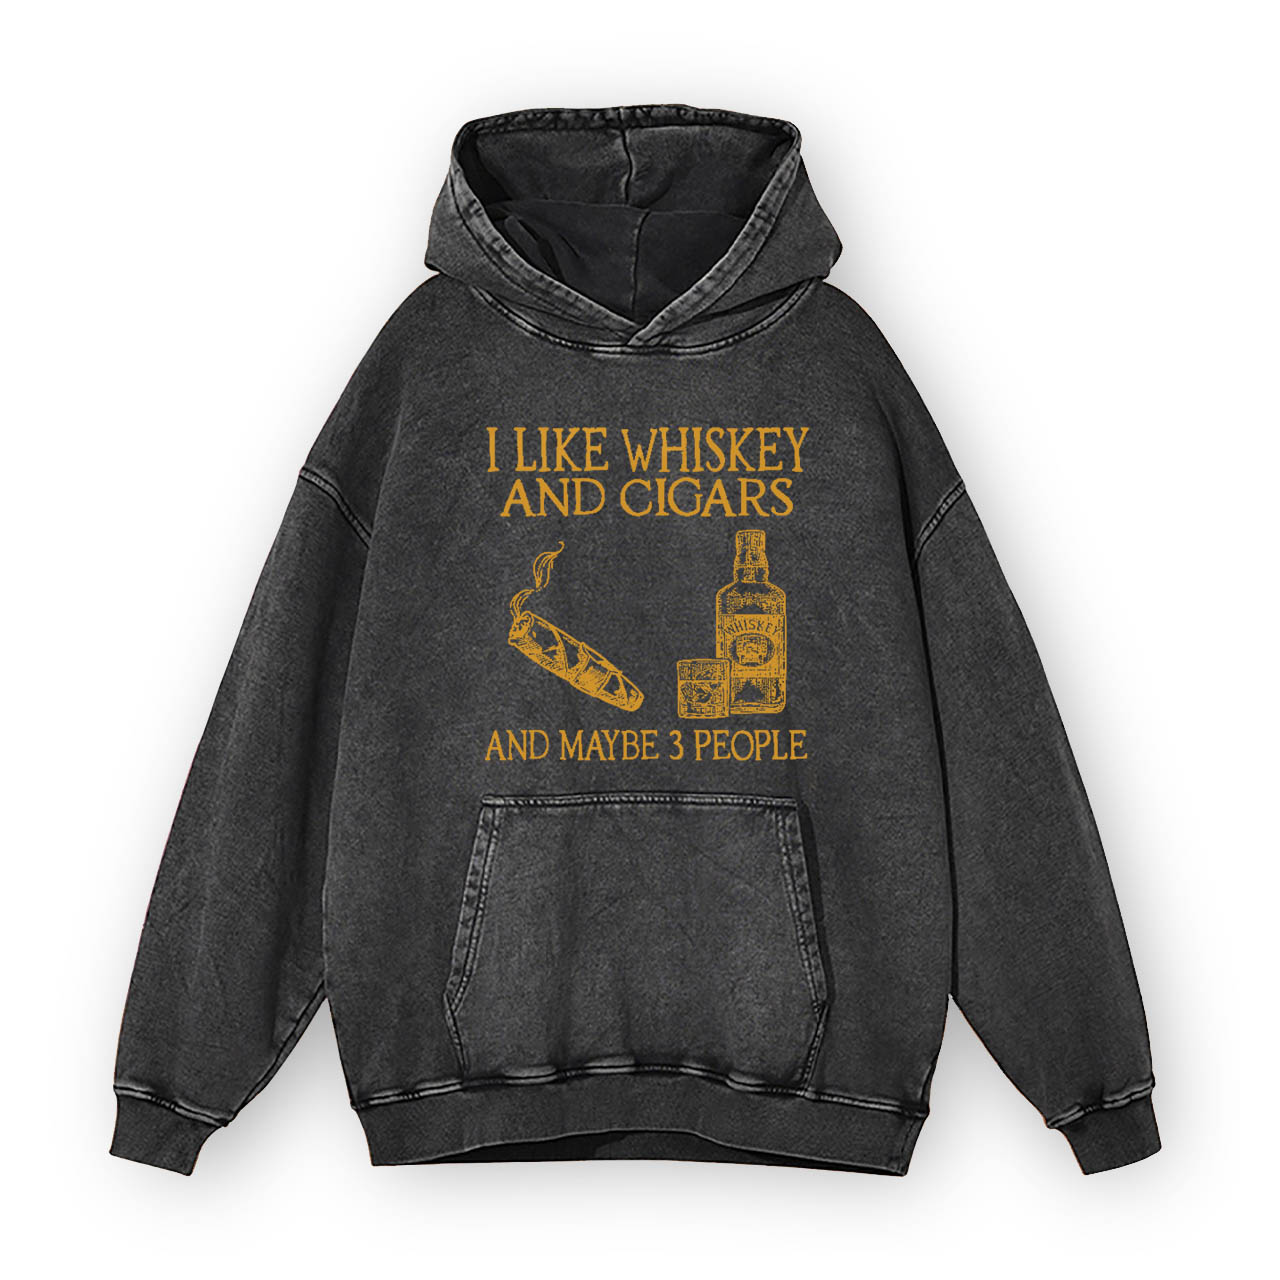 I Like Whiskey And Cigars And Maybe 3 People Garment-Dye Hoodies